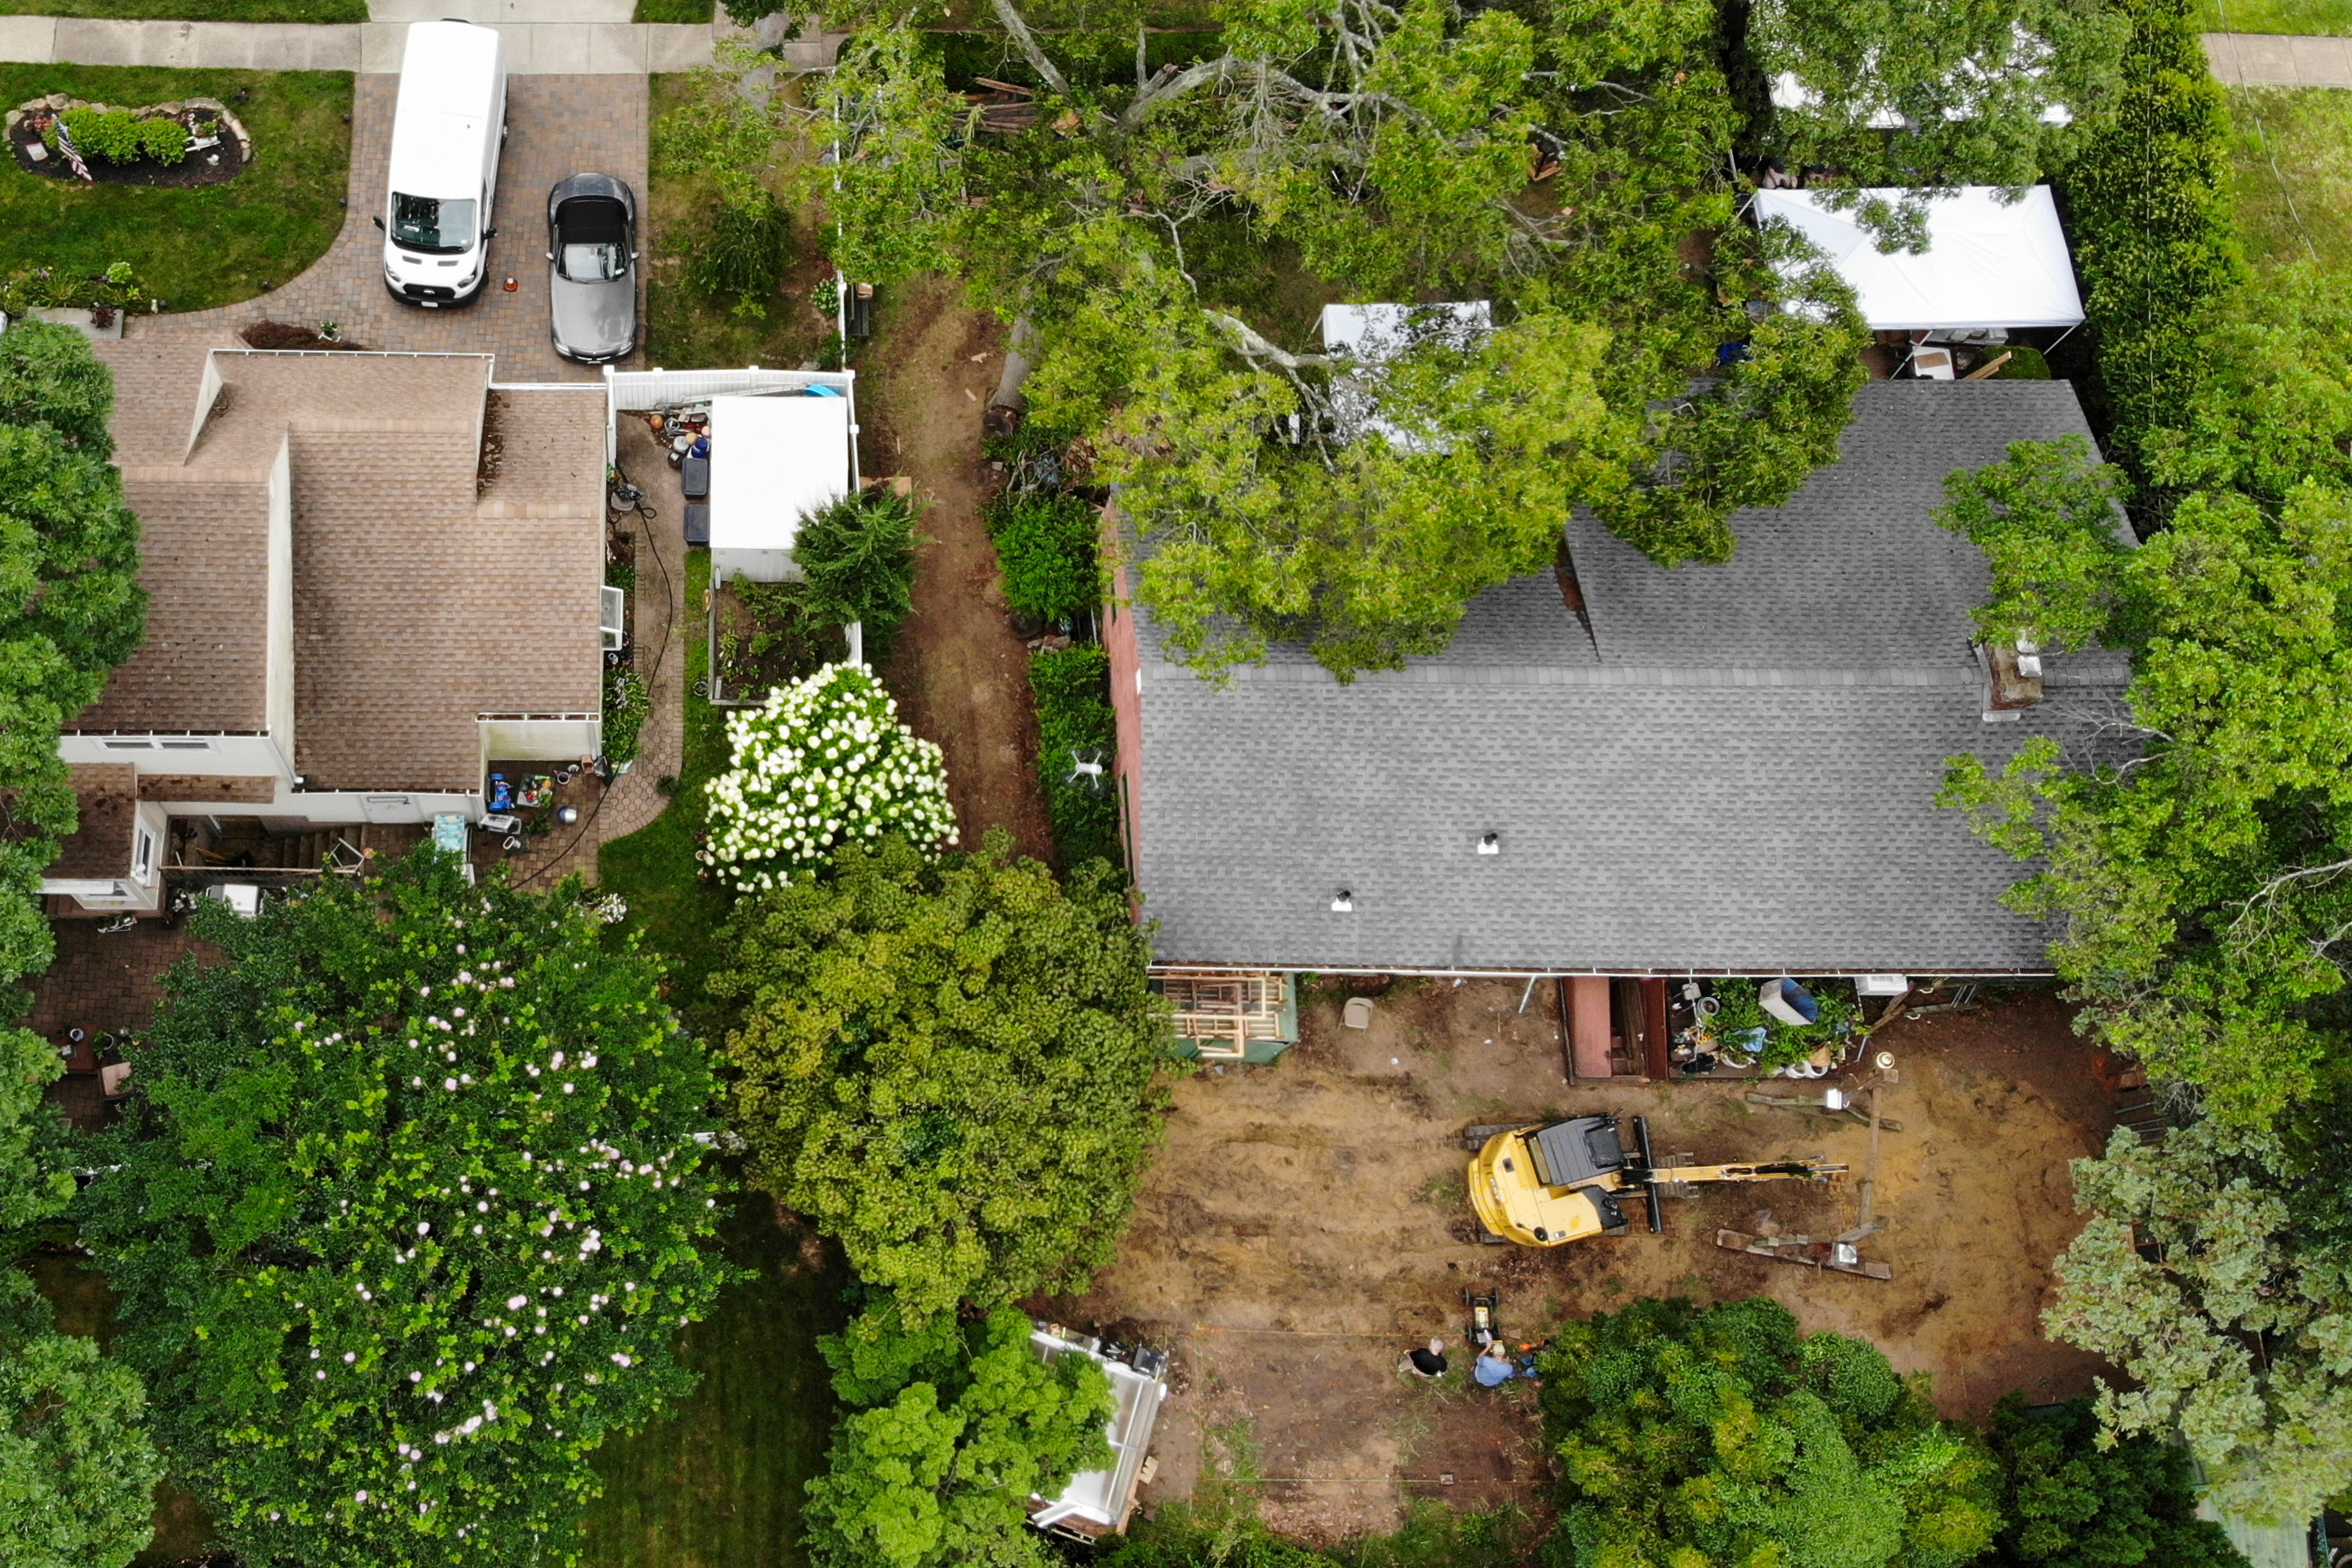 An overhead shot of the home of Rex Heuermann as it was searched by police in July following his arrest for the Gilgo Beach murders